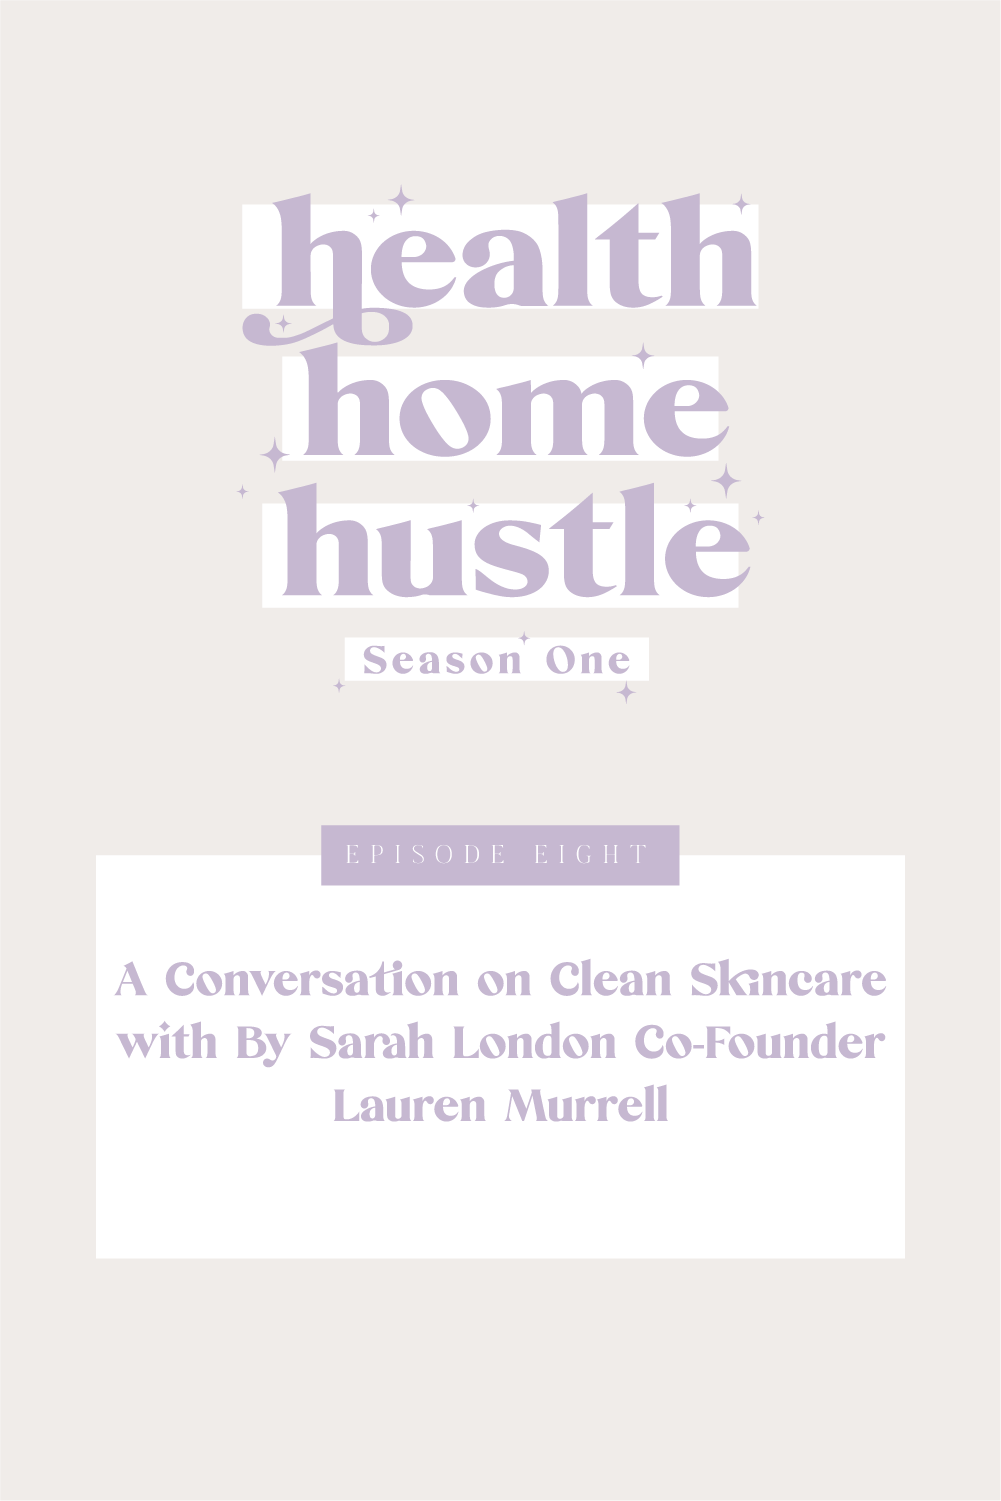 A Conversation on Clean Skincare with By Sarah London Co-Founder Lauren Murrell